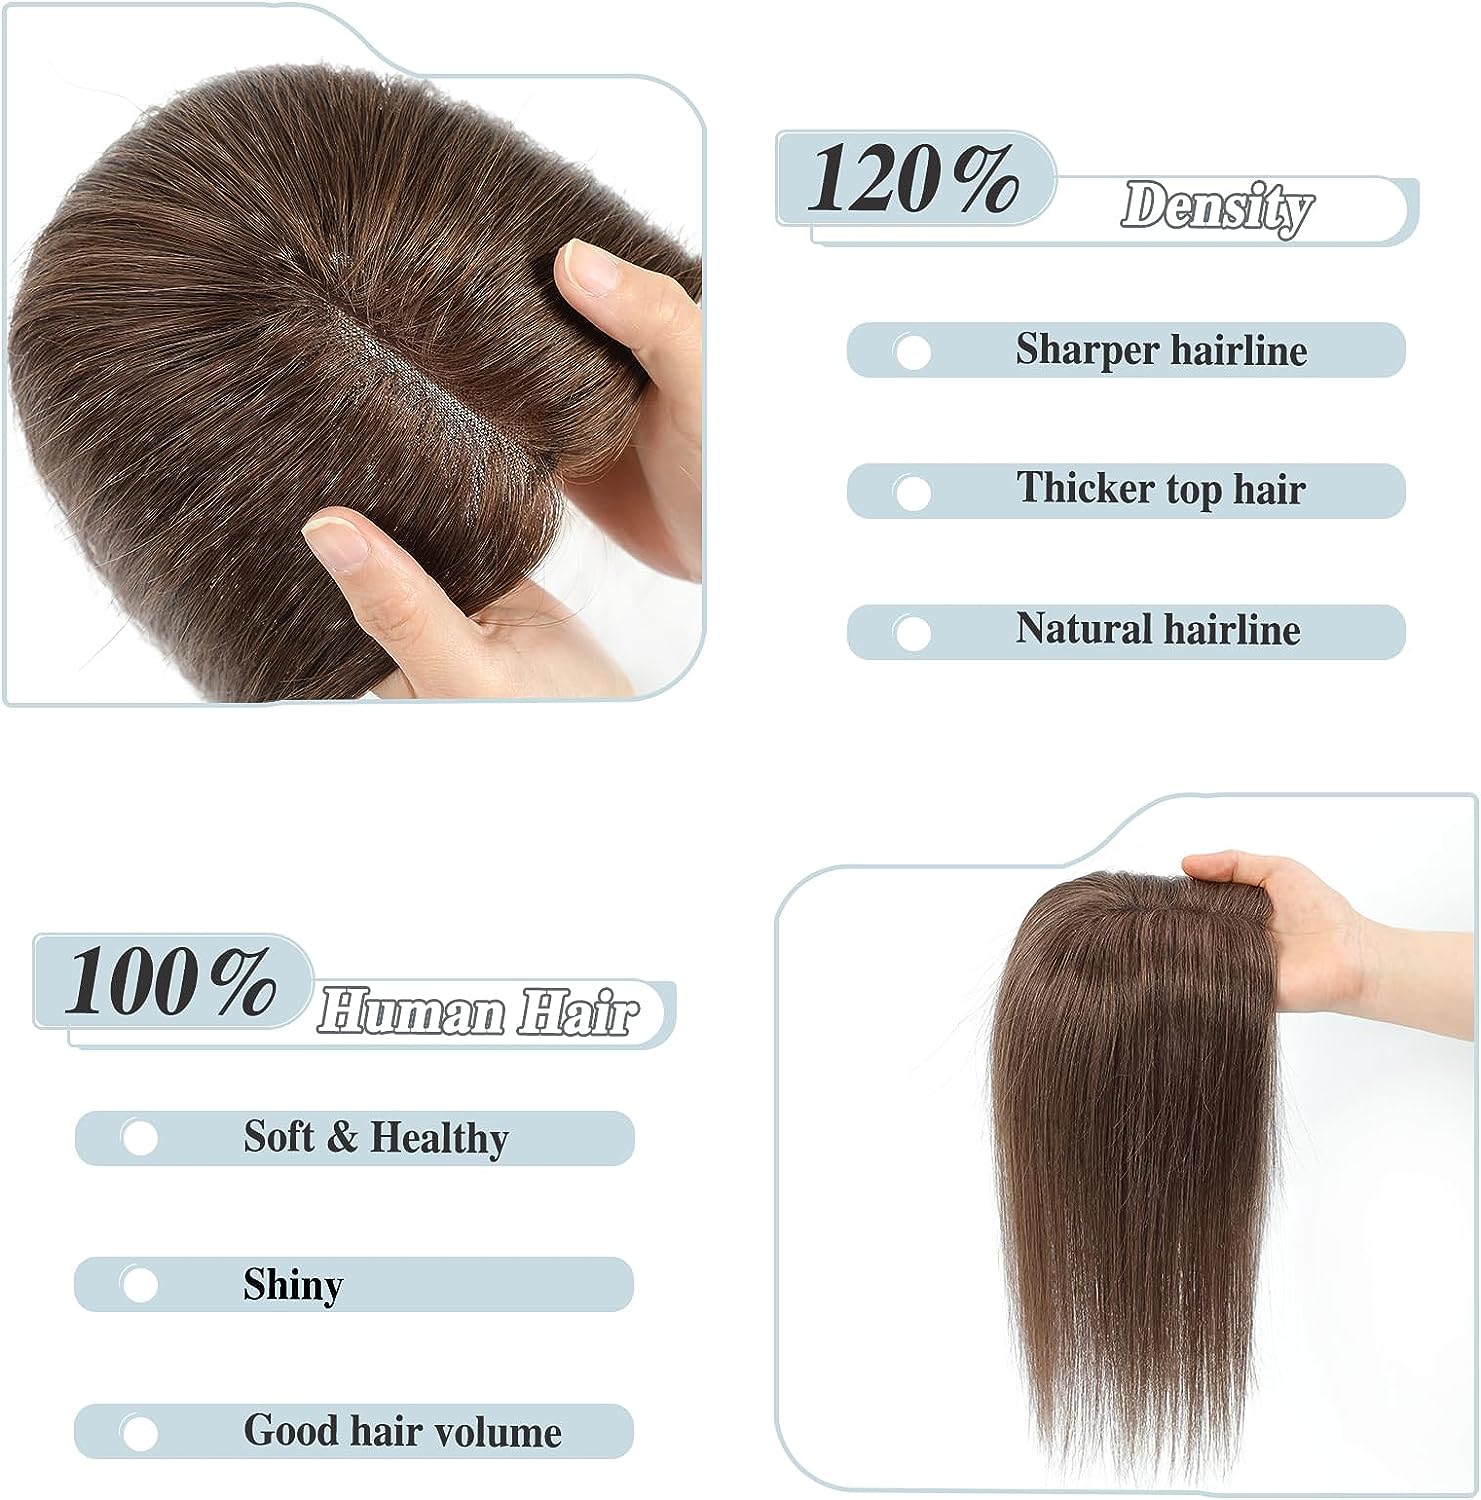 luckkimode Hair Toppers for Women Real Human Hair Topper No Bangs 120% Density Round Shaped Swiss Base Clip in Topper Top Hair Toppers with Thinning Hair,10 * 12cm 12 Inch 40g - Medium Auburn Brown